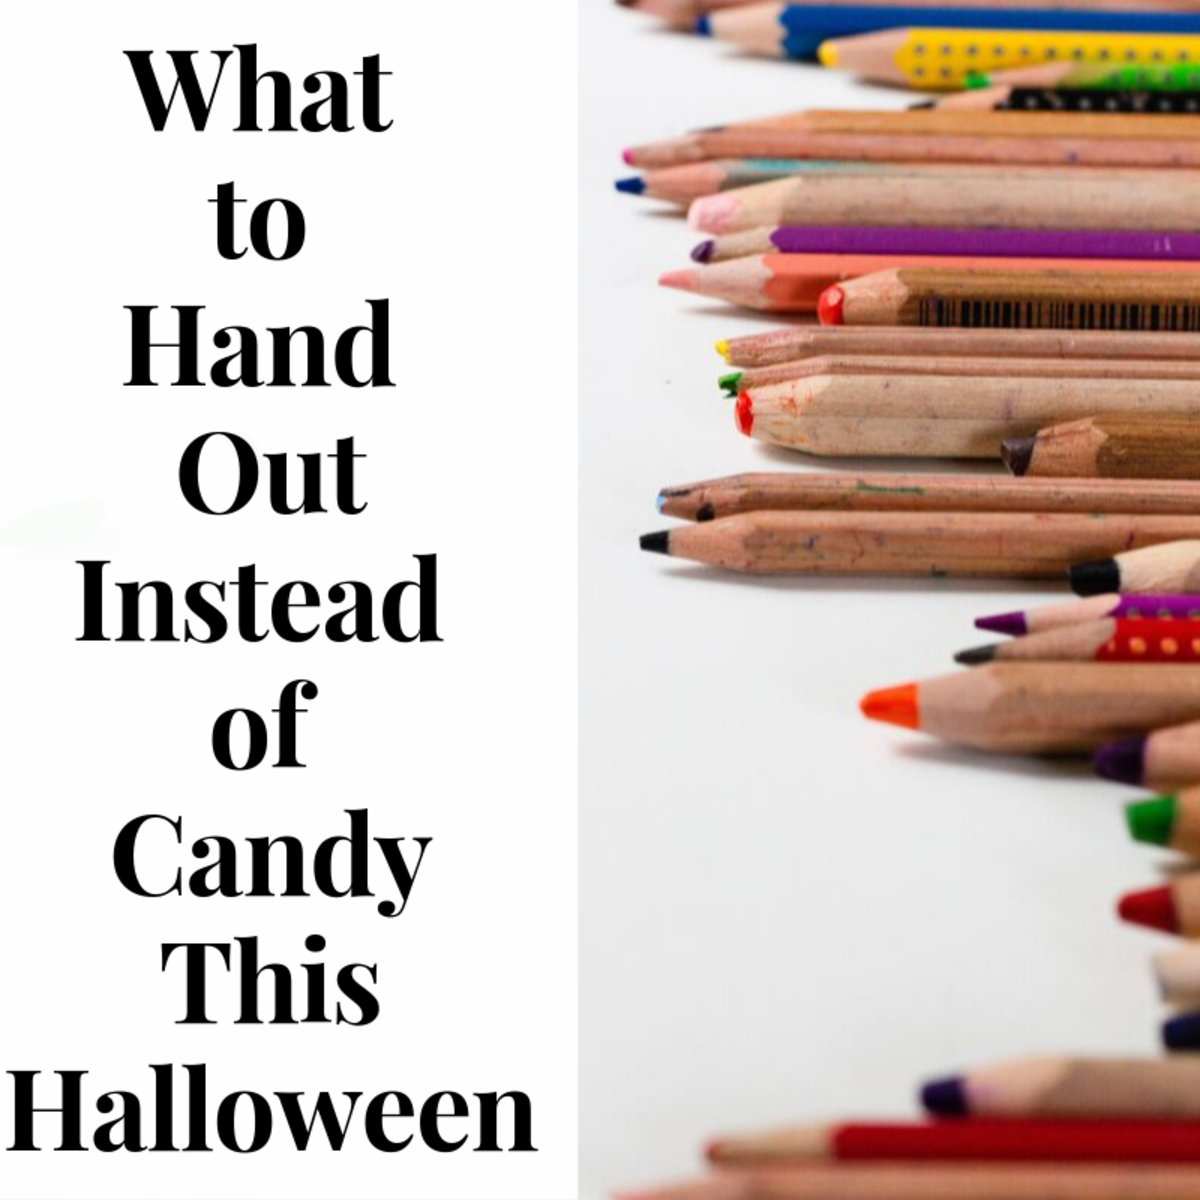 7 Things to Hand Out Instead of Candy This Halloween